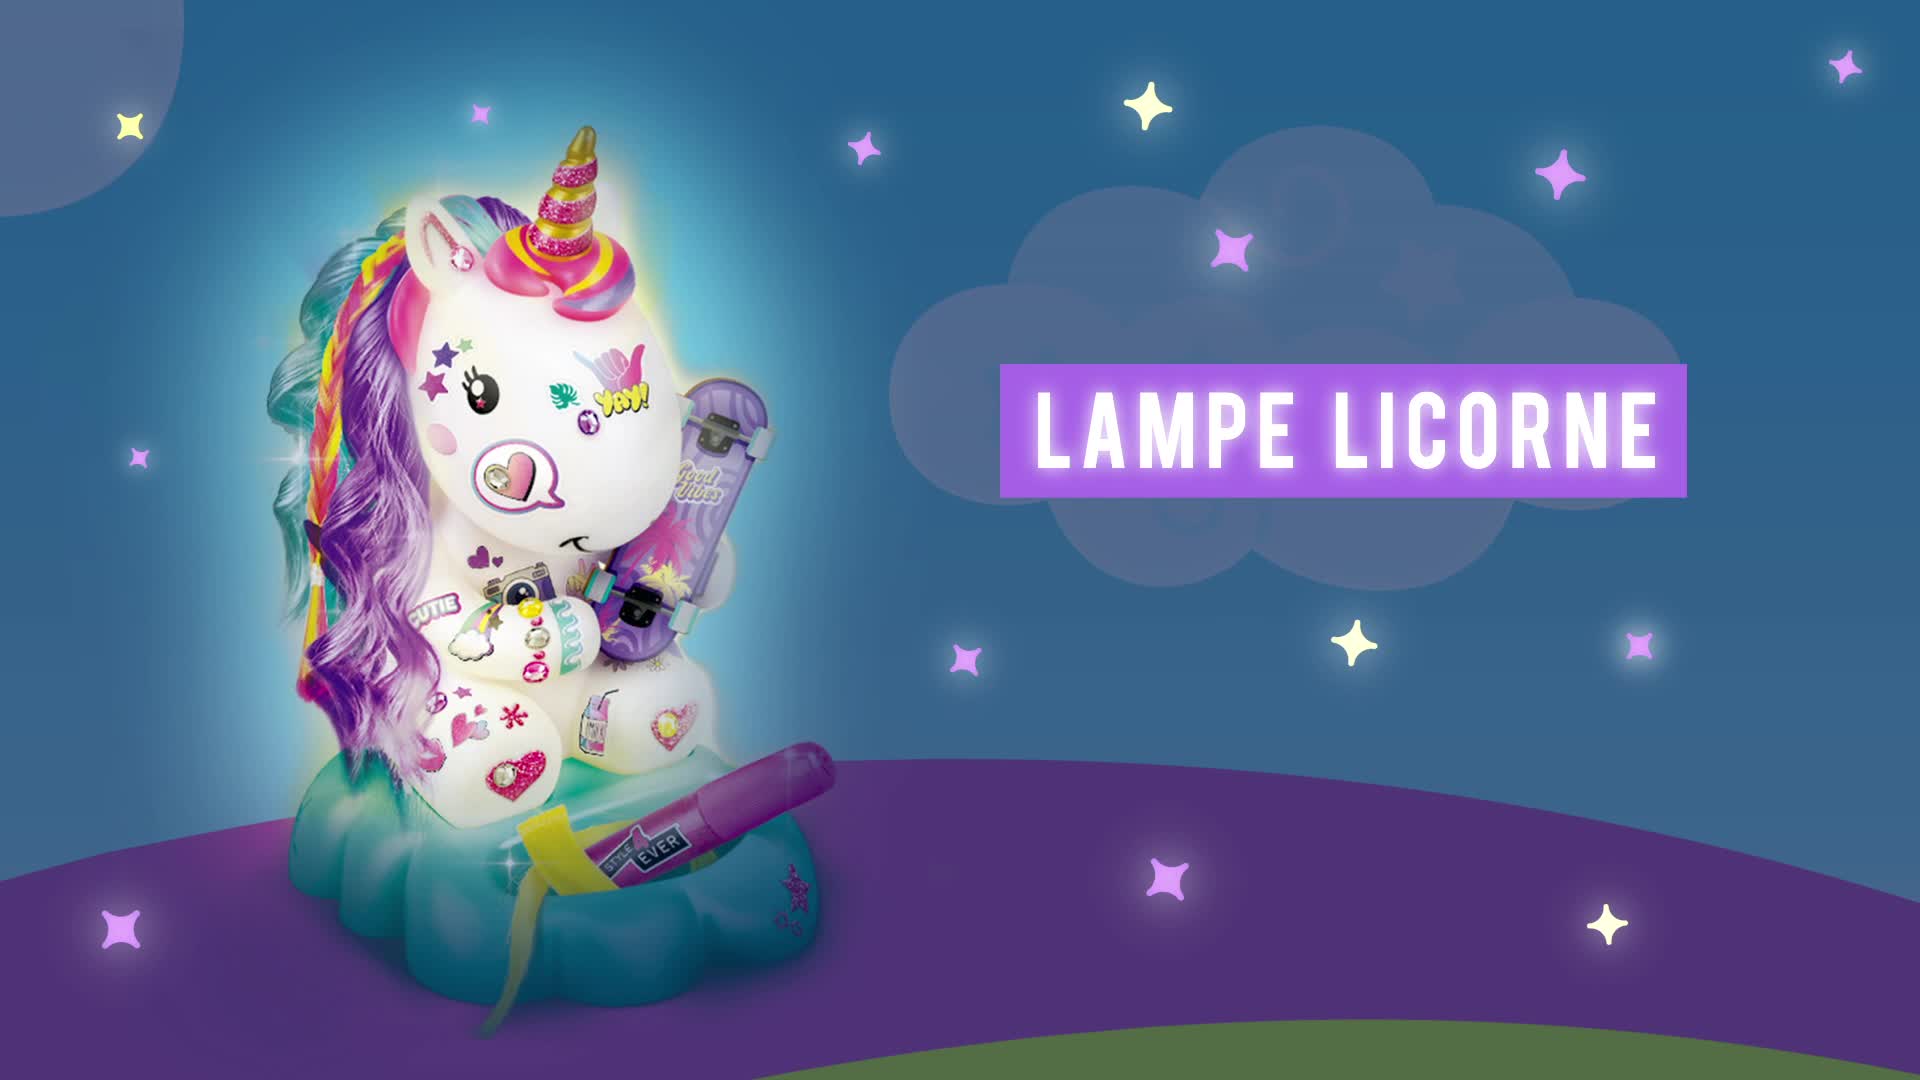 Lampe licorne DIY Canal Toys : King Jouet, Veilleuses Canal Toys